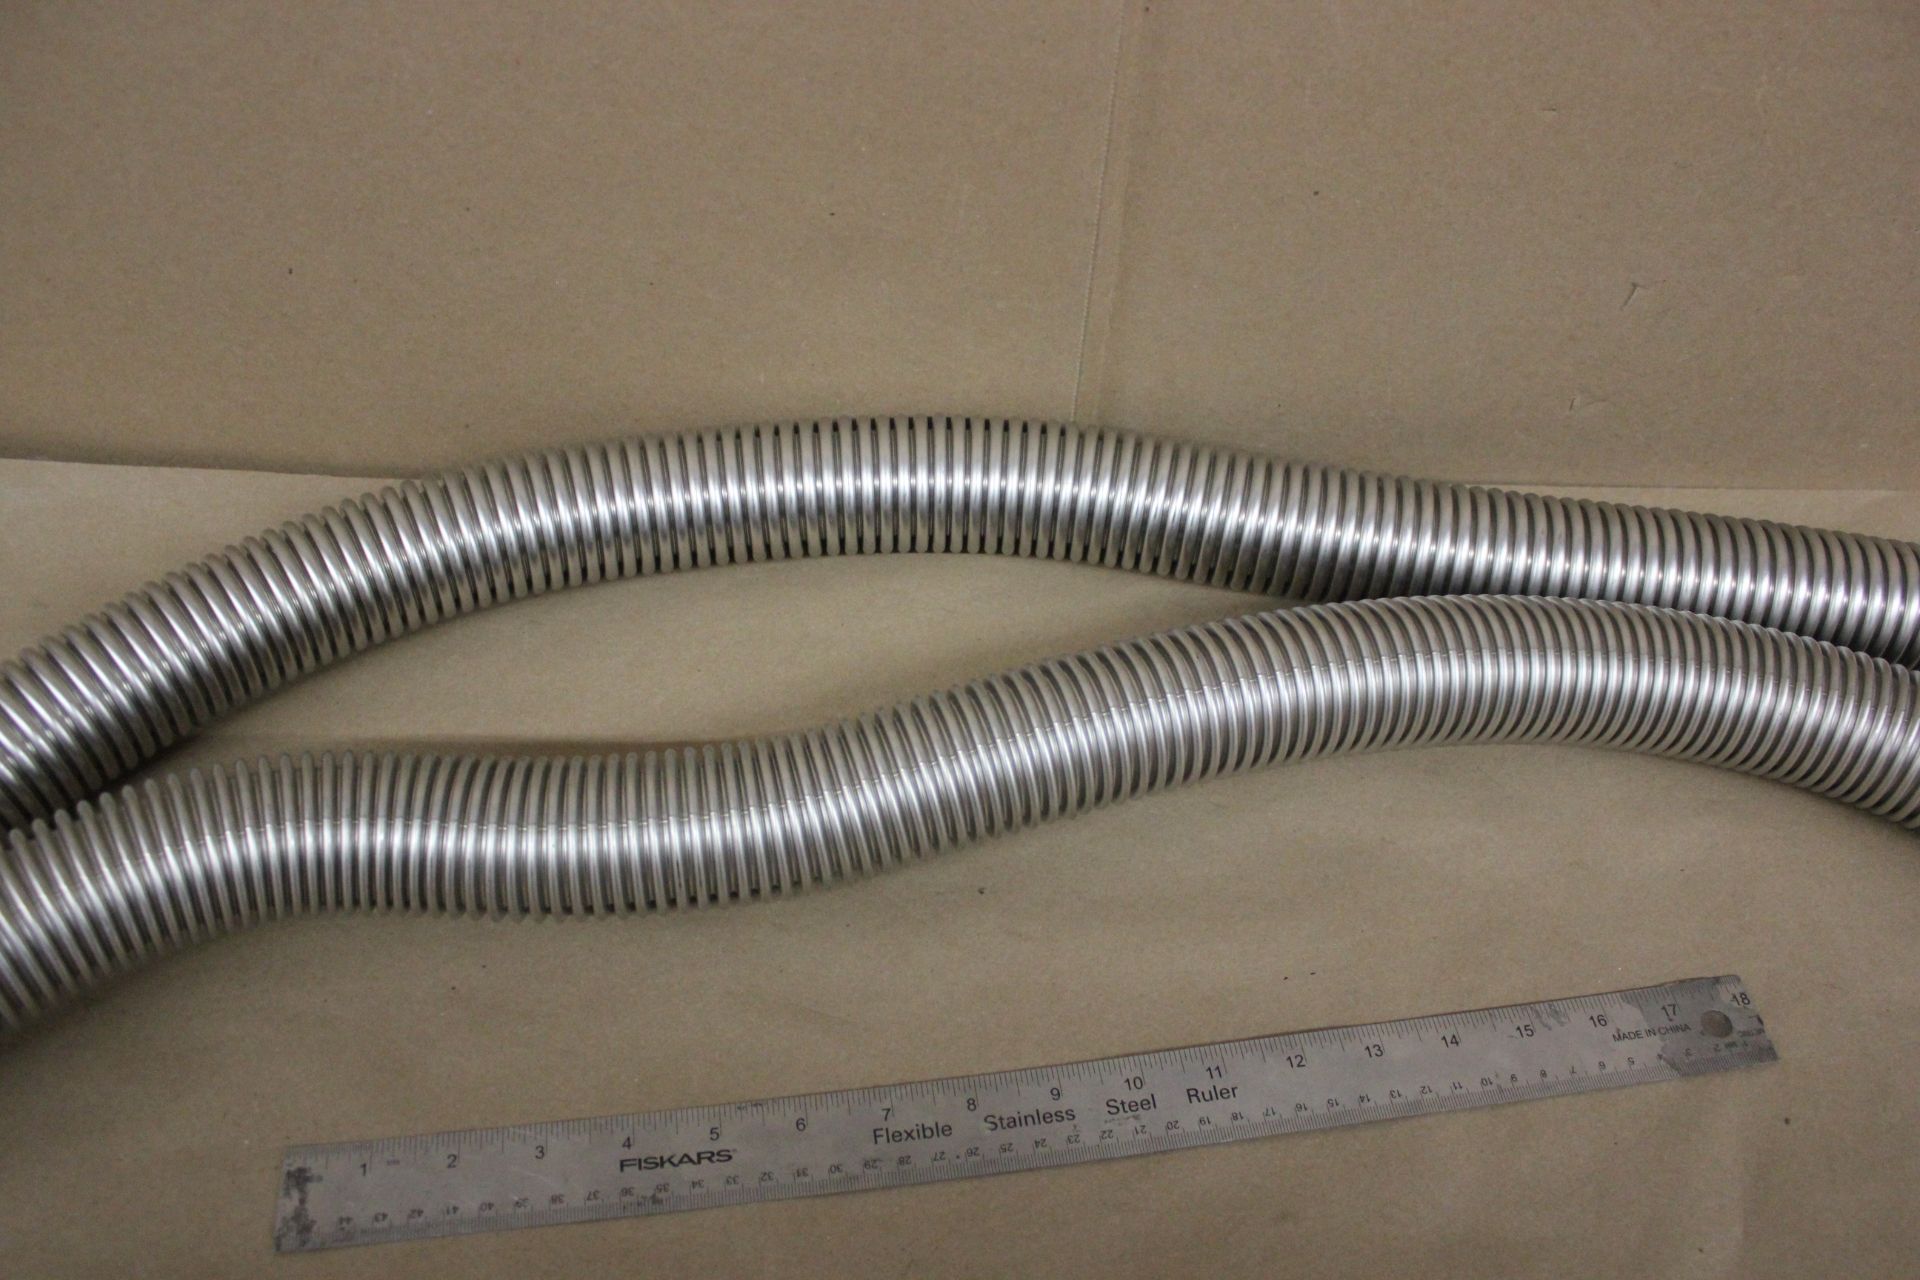 LOT OF 2 FLEXIBLE BELLOWS VACUUM HOSES - Image 3 of 7